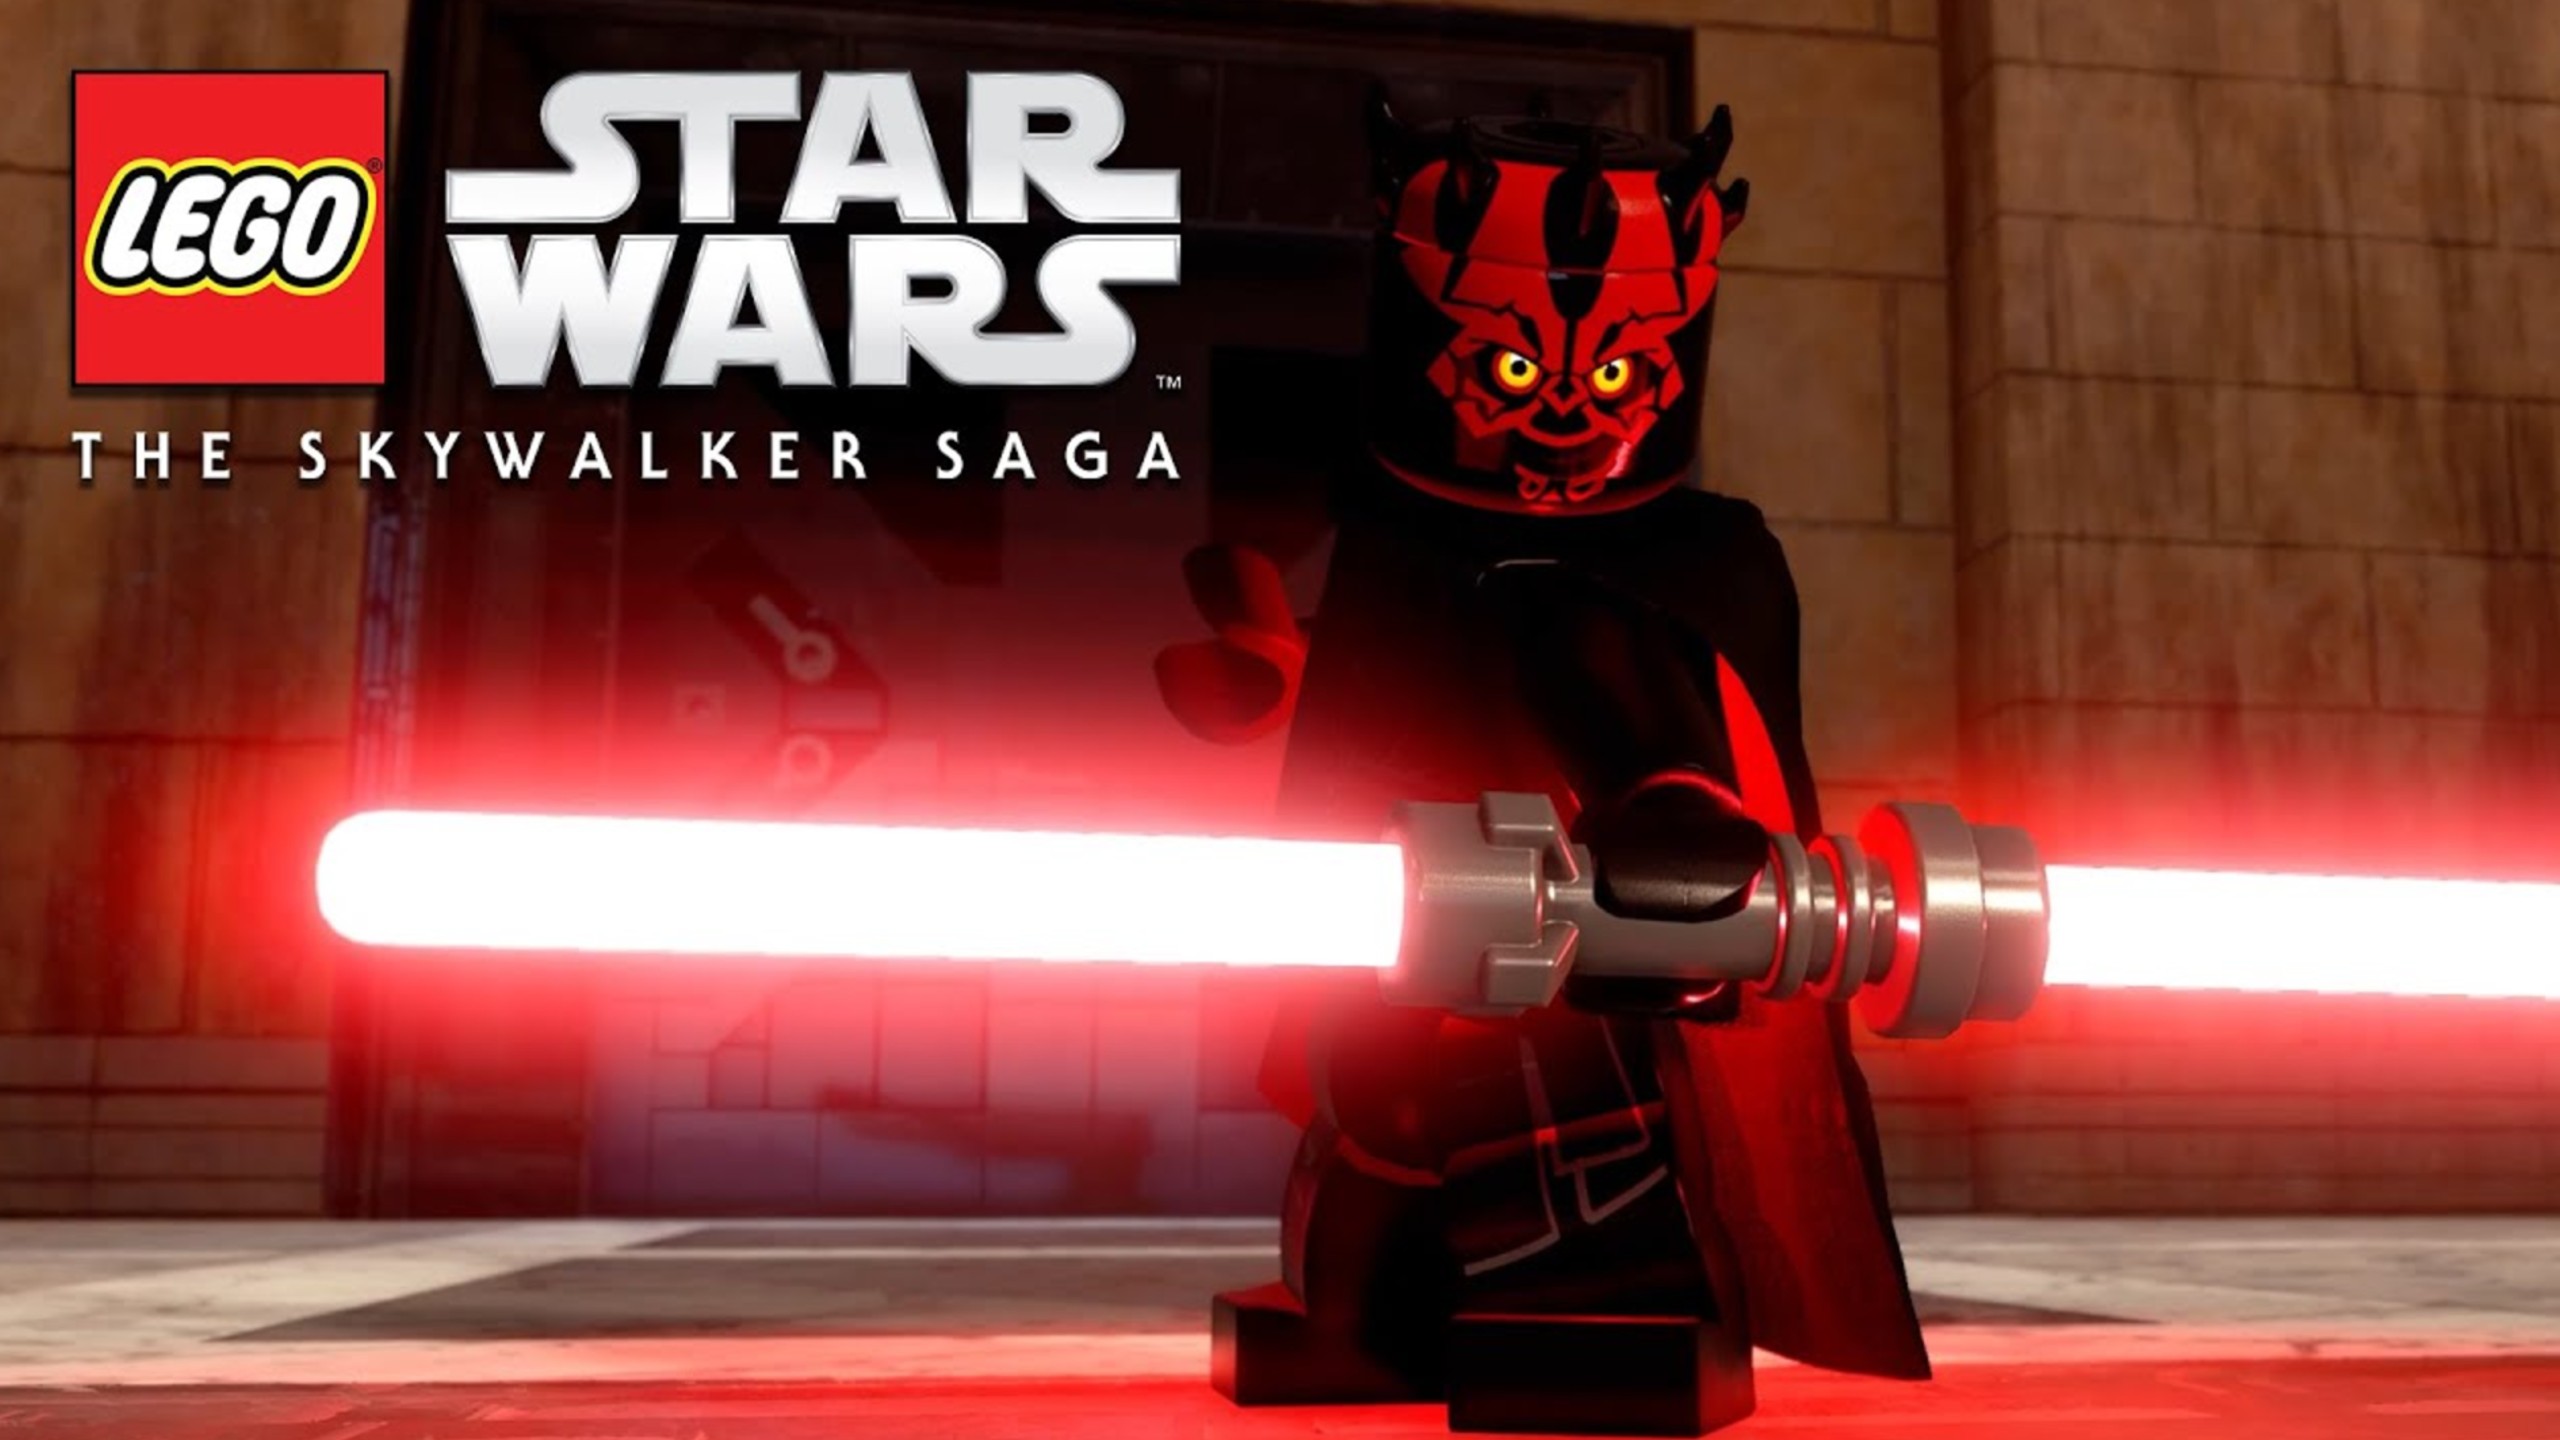 LEGO Star Wars: The Skywalker Saga finally has a release date, but there's a darker side to it. - Jay's Brick Blog